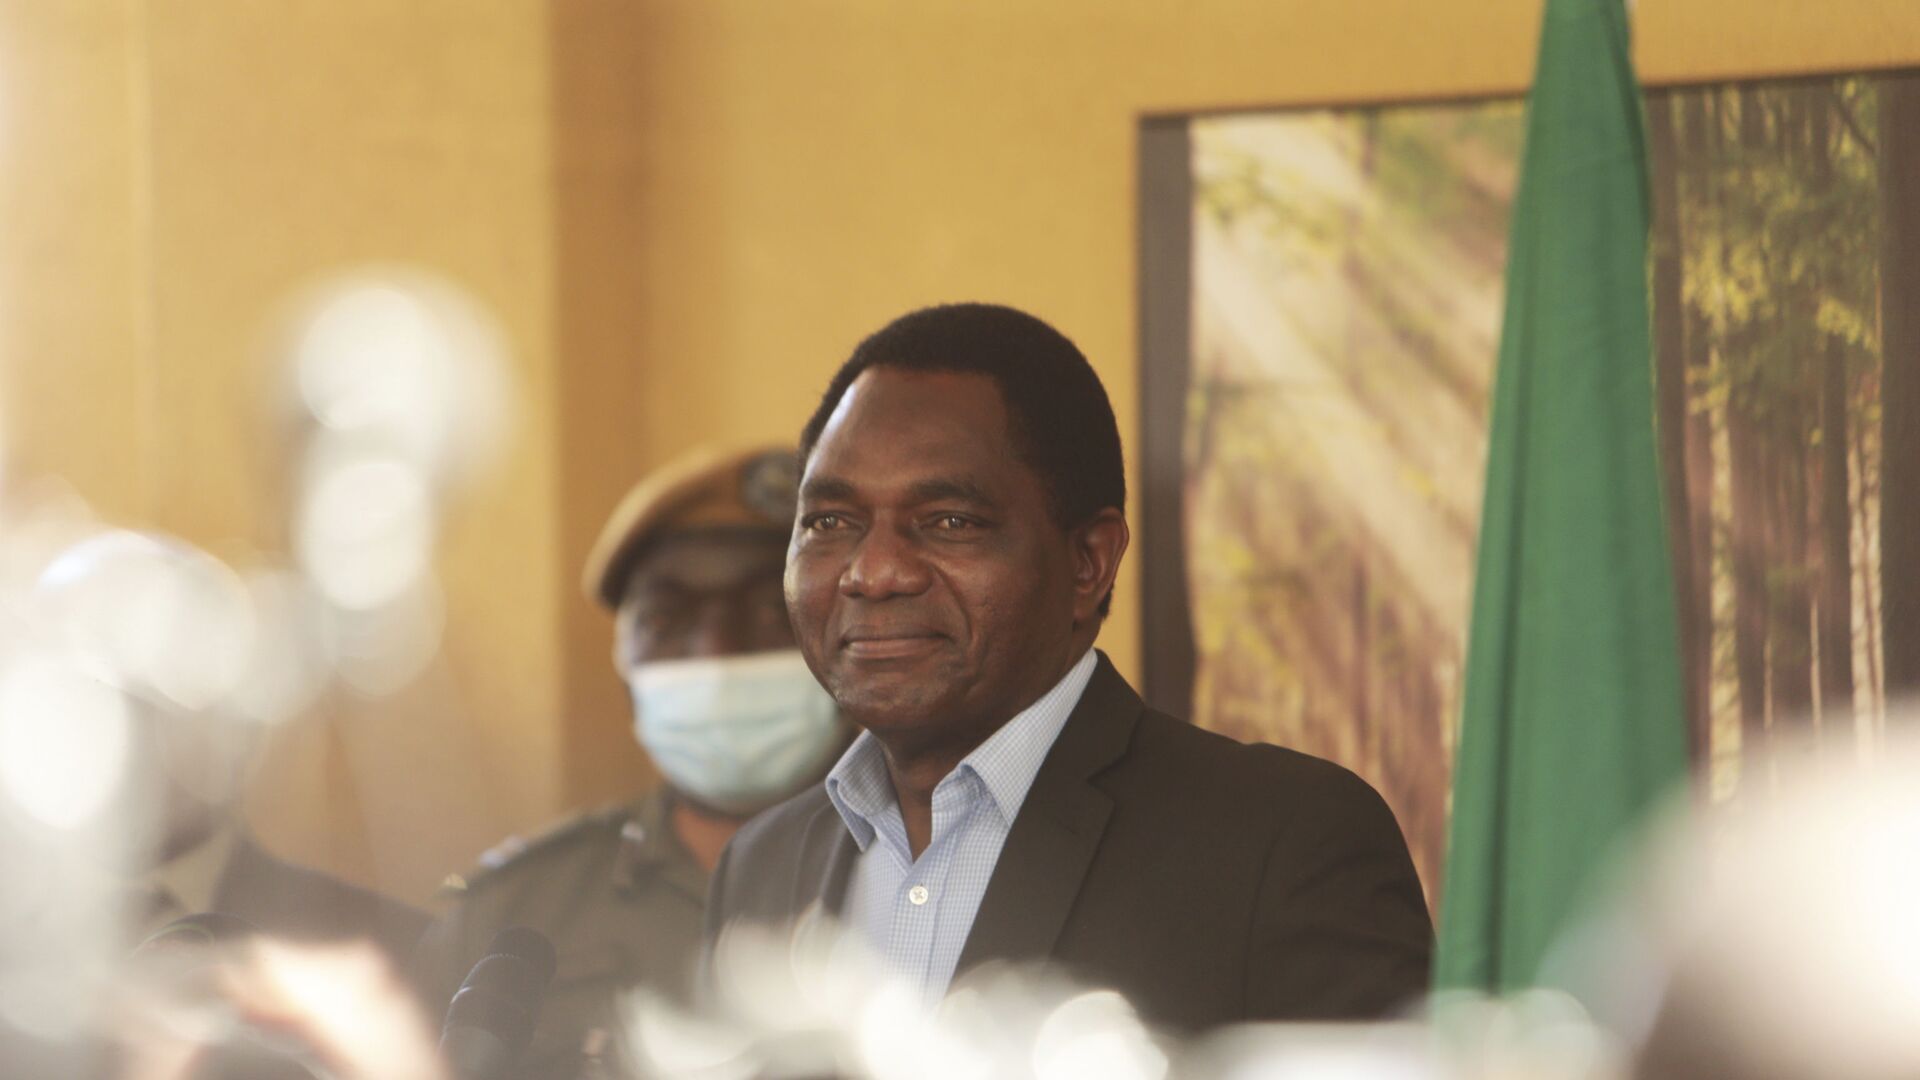 Zambian president elect Hakainde Hichilema addresses a press conference at his residence in Lusaka, Zambia, Monday Aug, 16, 2021.  Hichilema has won the southern African country's presidency after defeating President Edgar Lungu with more than 50% of the vote. - Sputnik International, 1920, 18.08.2021